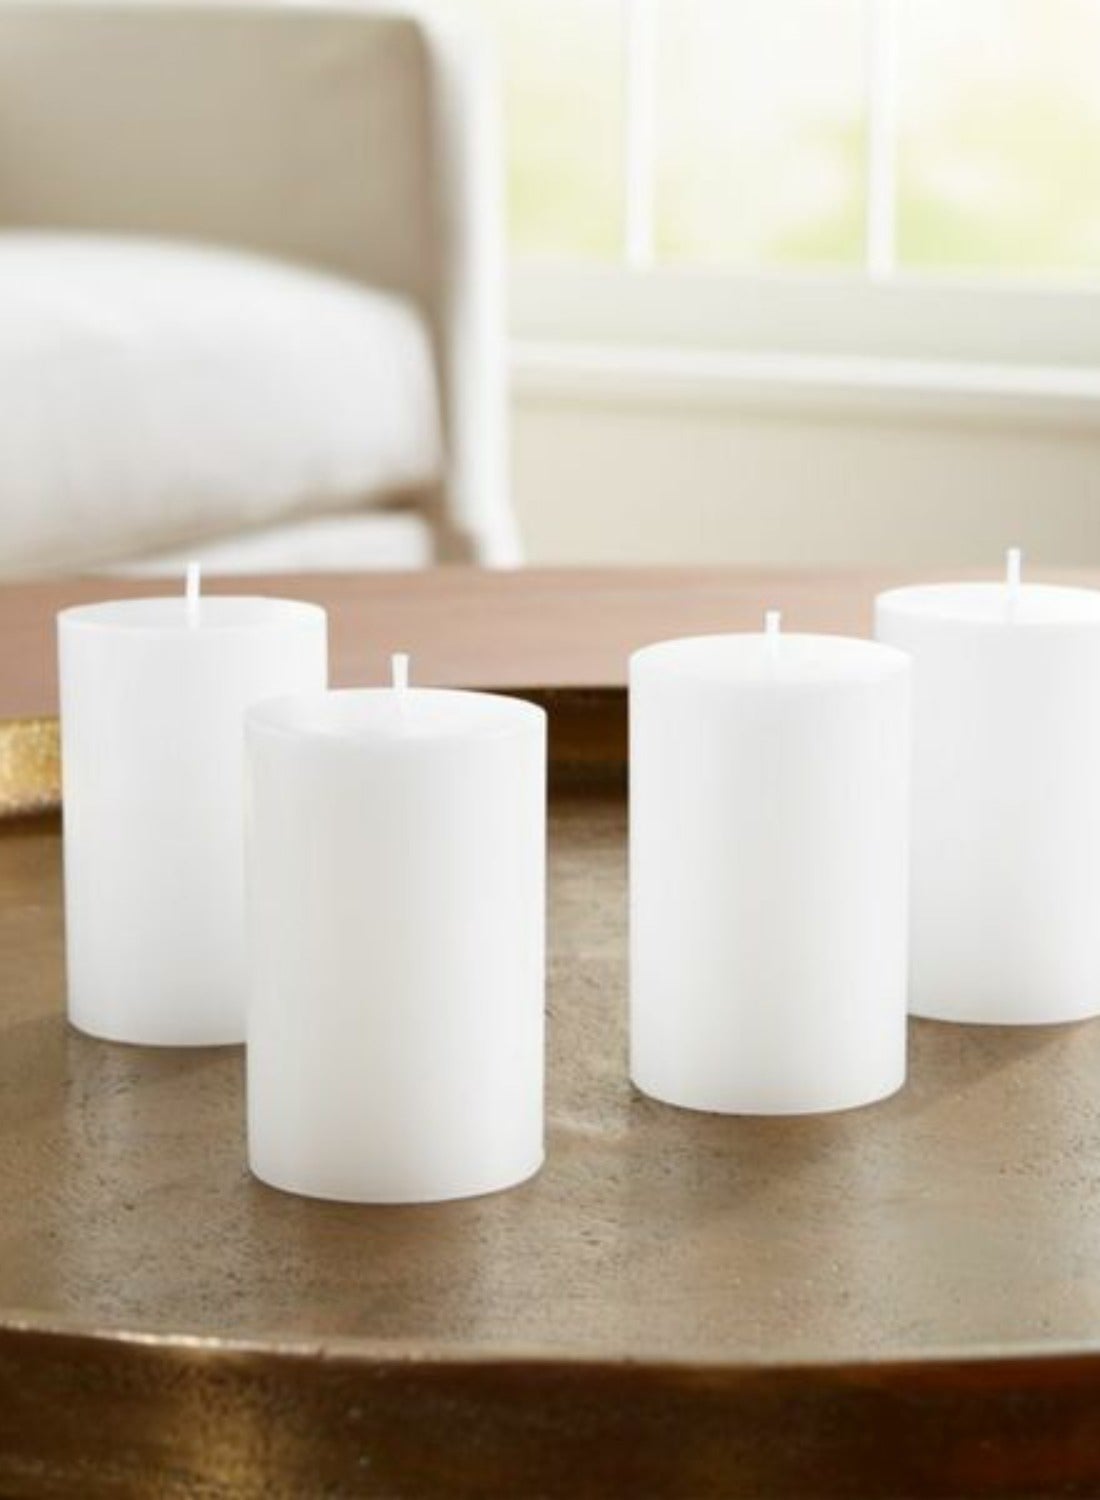 4-Piece Unscented Wax Pillar Candles Set 525g Unique Luxury Quality Product For The Perfect Stylish Home White 3 x 5.5inch 